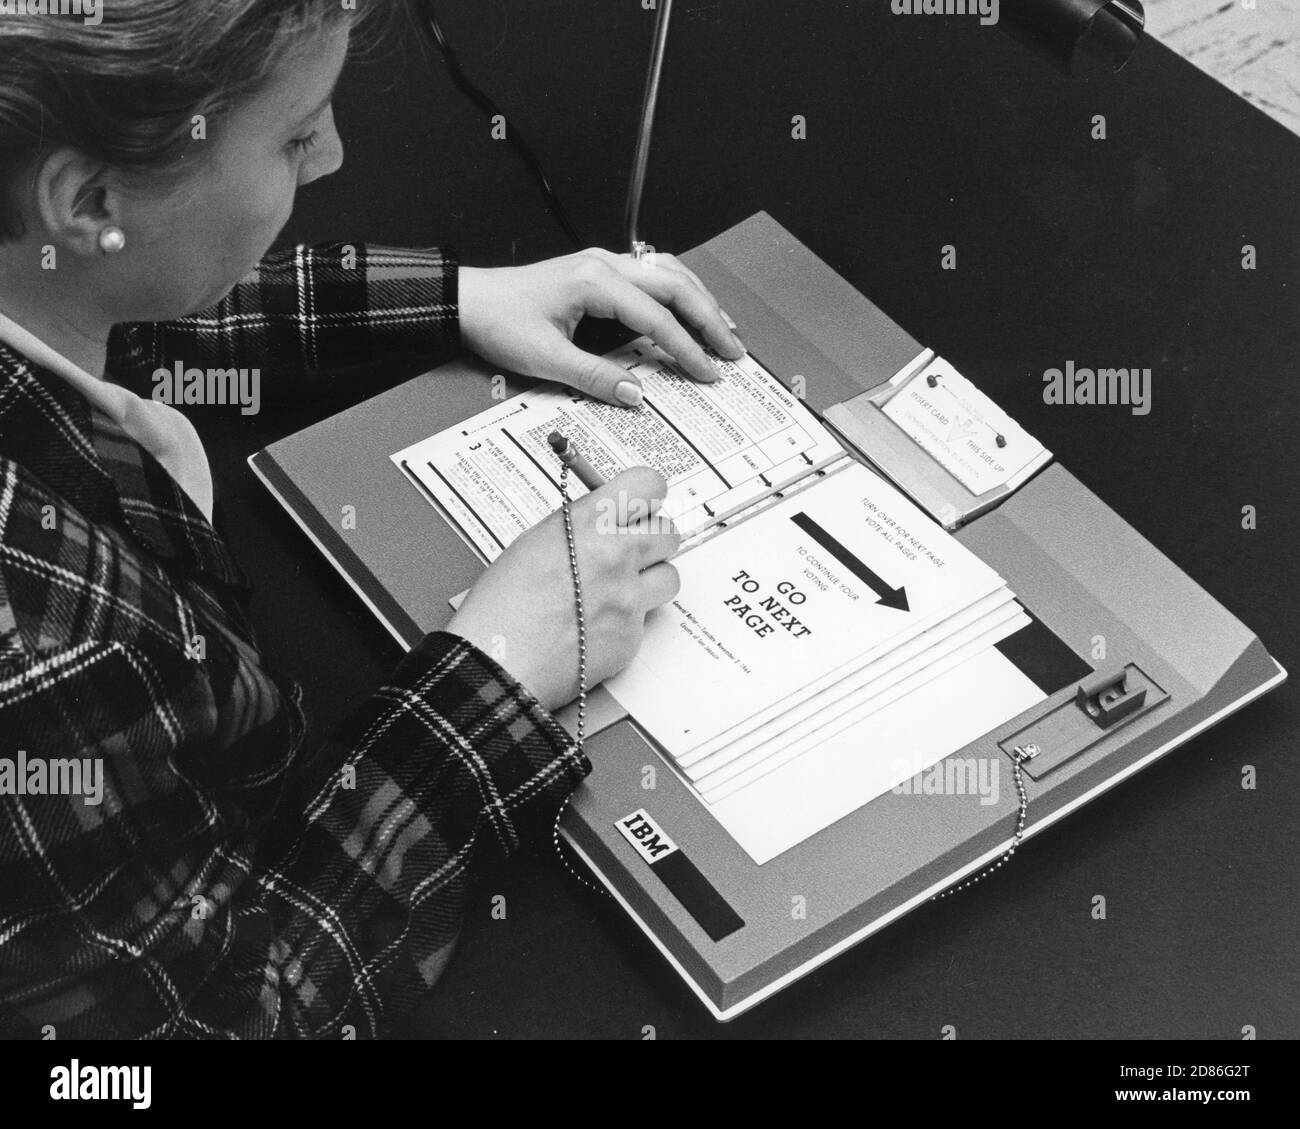 Woman demonstrates a simple voting machine made by IBM in which the voter casts ballot by punching holes in a card which drops into a ballot box. At the end of the day, cards are run through an electronic machine that totals the votes, 1966. (Photo by International Business Machines/United States Information Agency/RBM Vintage Images) Stock Photo